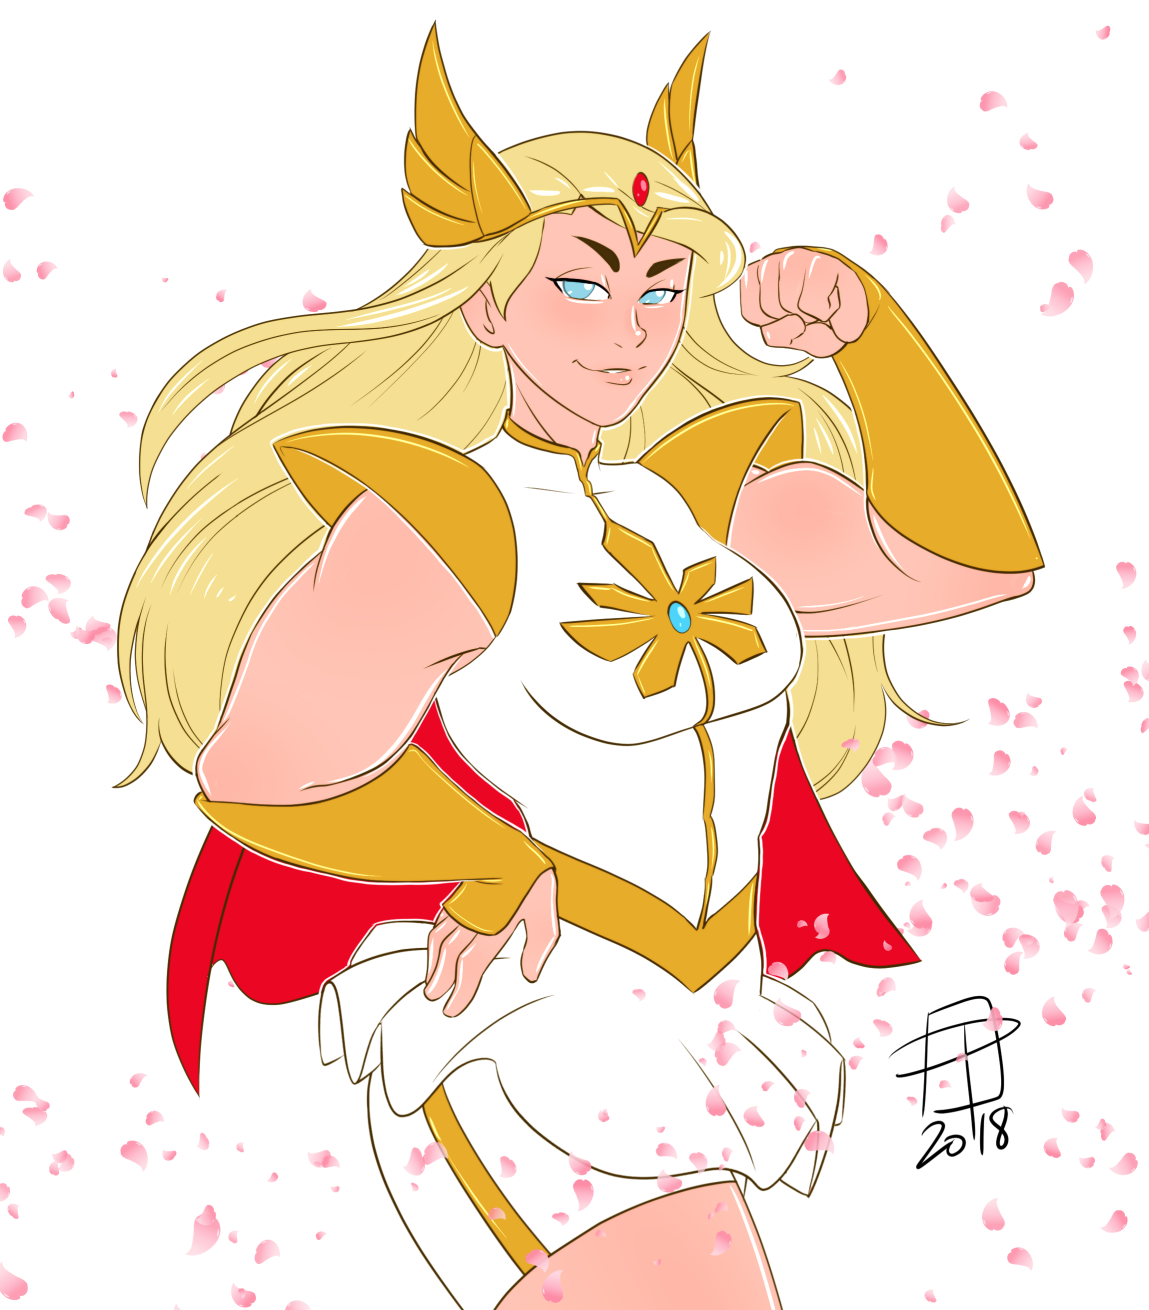 callmepo: This is what I picture when you call She-Ra the Princess of Power!  Playing